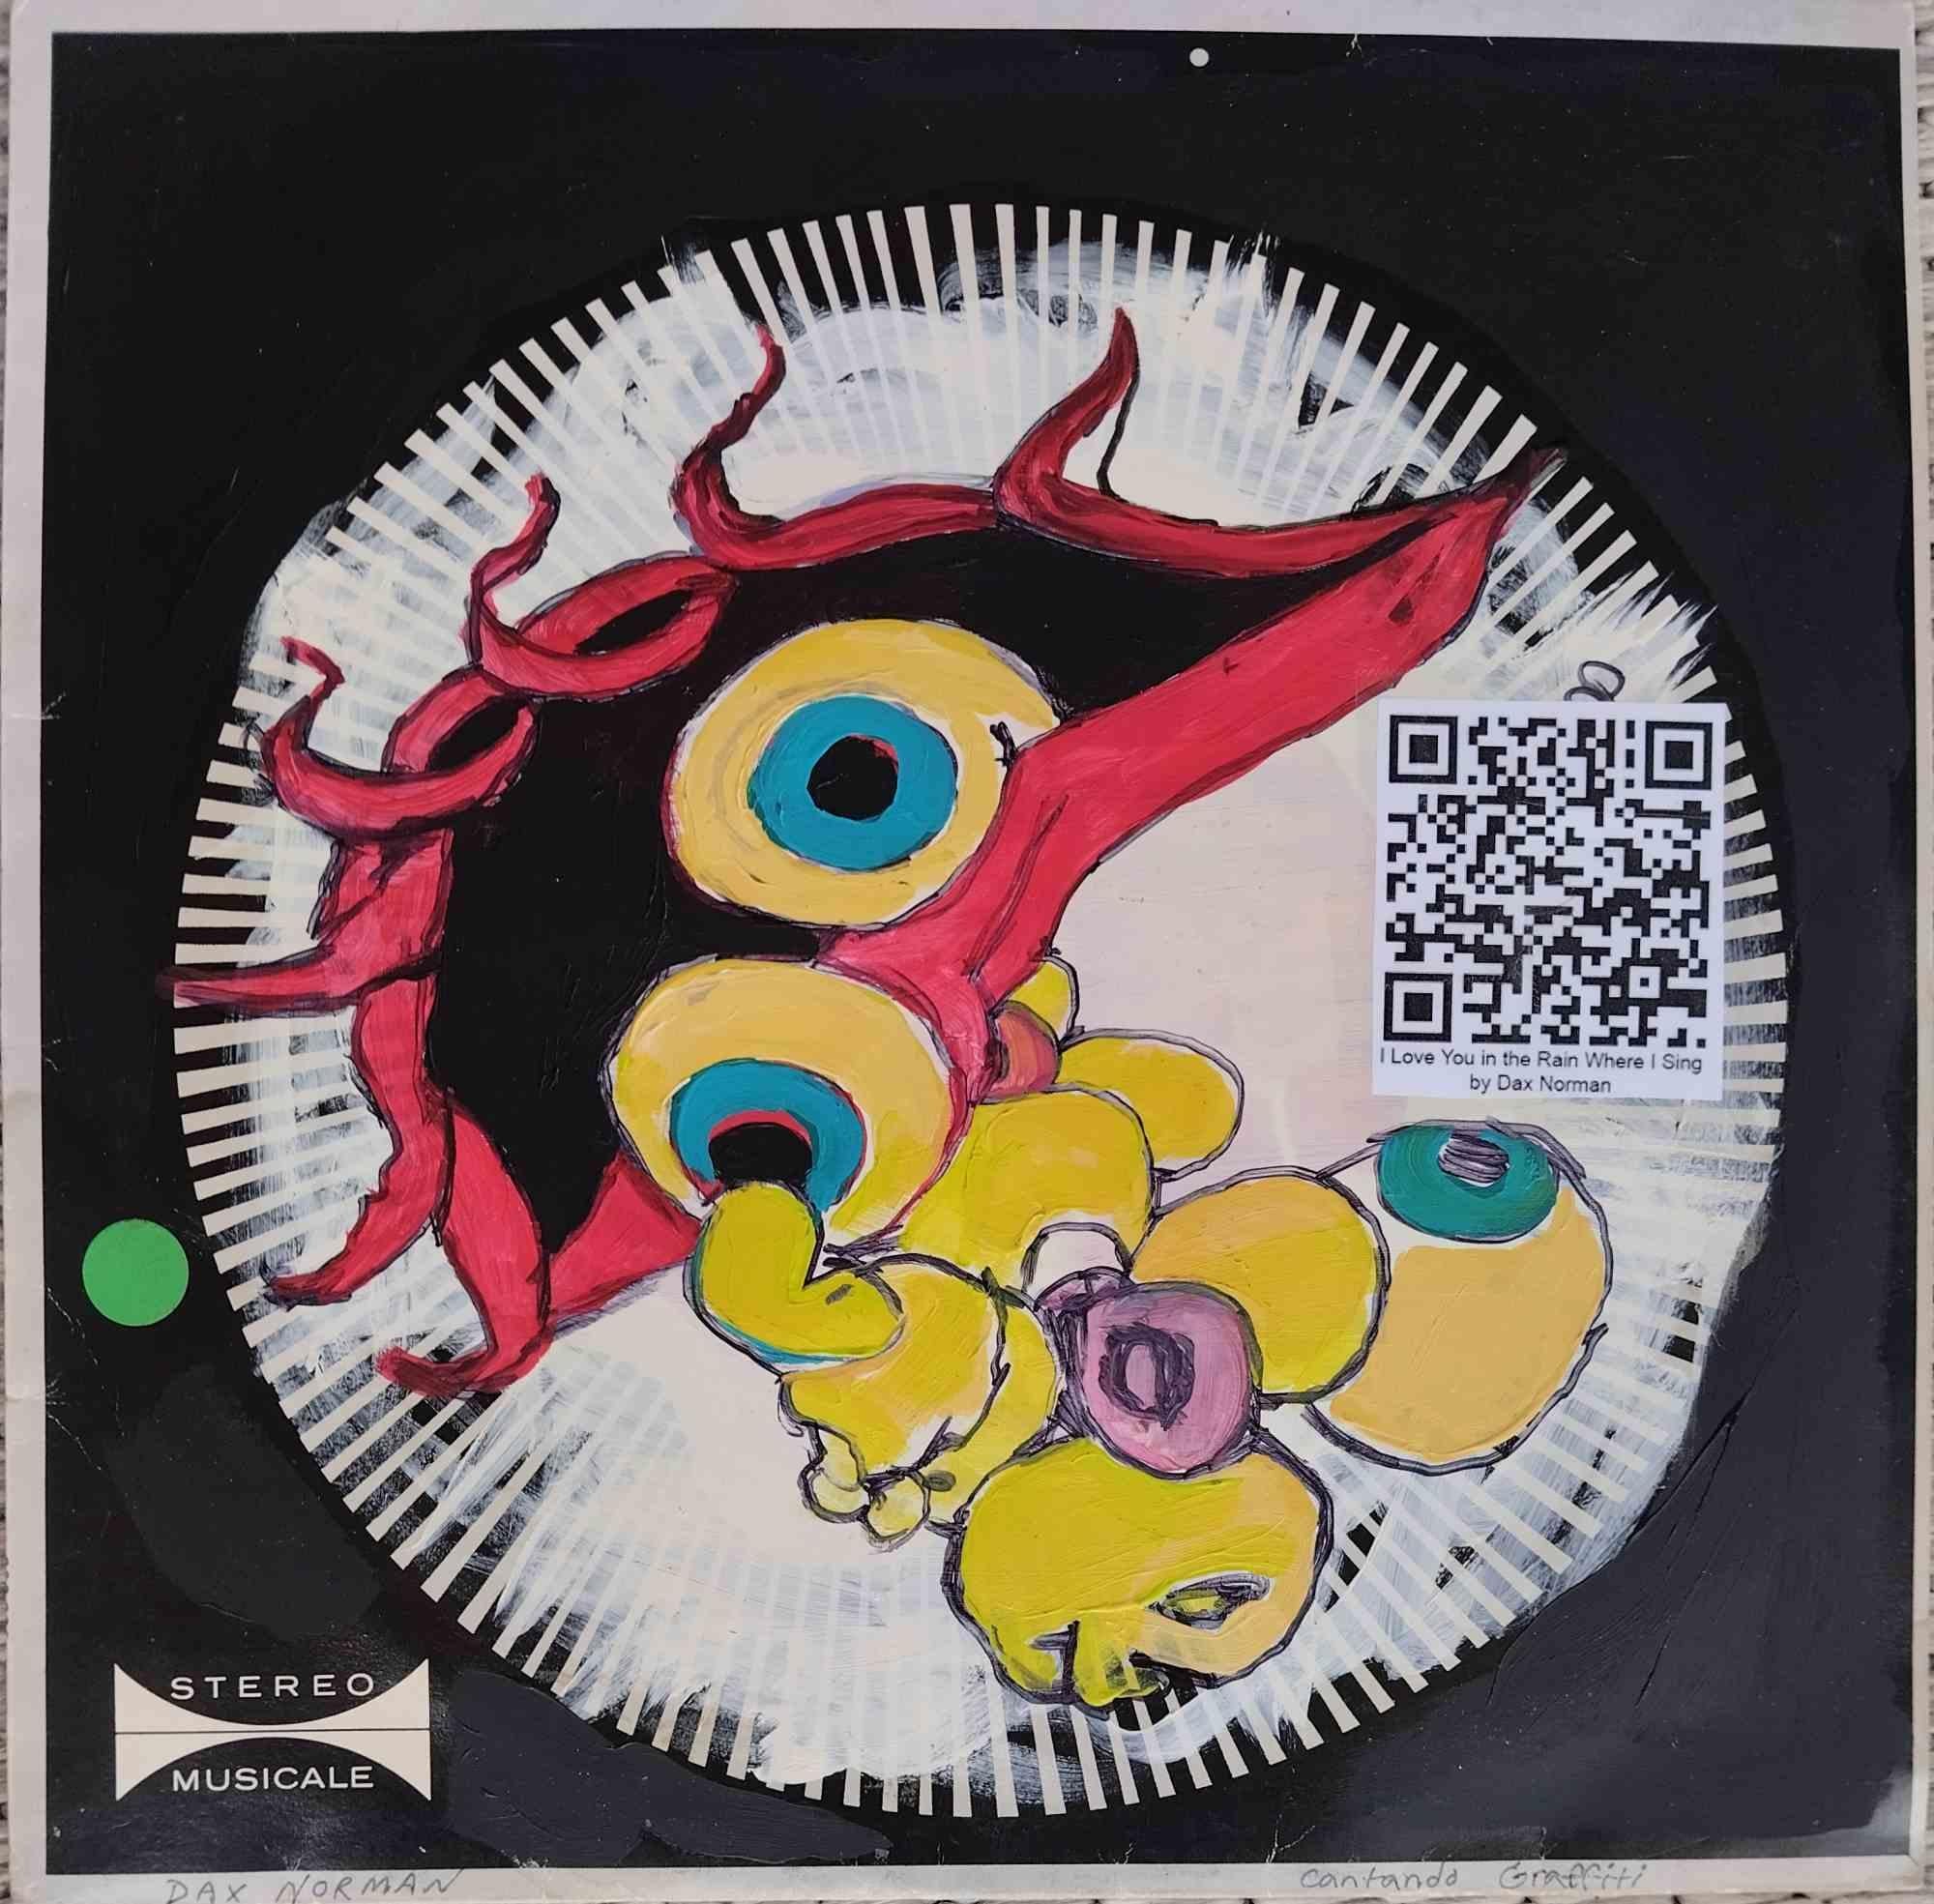 Cantando Graffiti (frame 08) is an original acrylic painting on recycled record cover featured in Dax Norman's "Cinema Graffiti" NFT collection. Hand-signed.

The works in this collection of paintings blur the lines between the physical and digital,